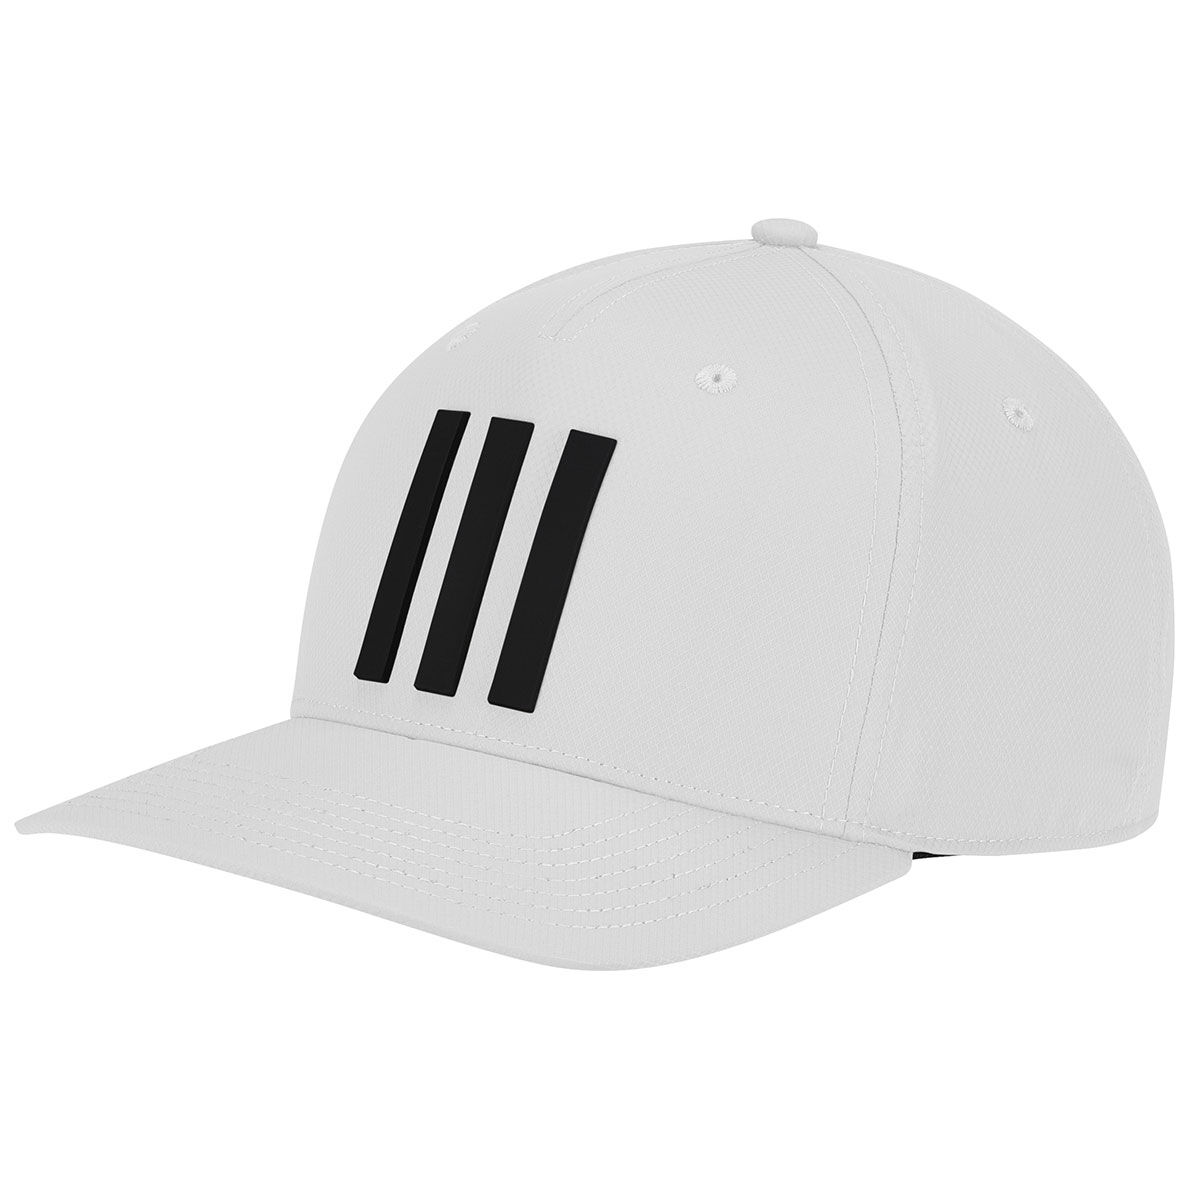 adidas Golf Men’s White and Black Lightweight Striped Tour Snapback Golf Cap | American Golf, One Size